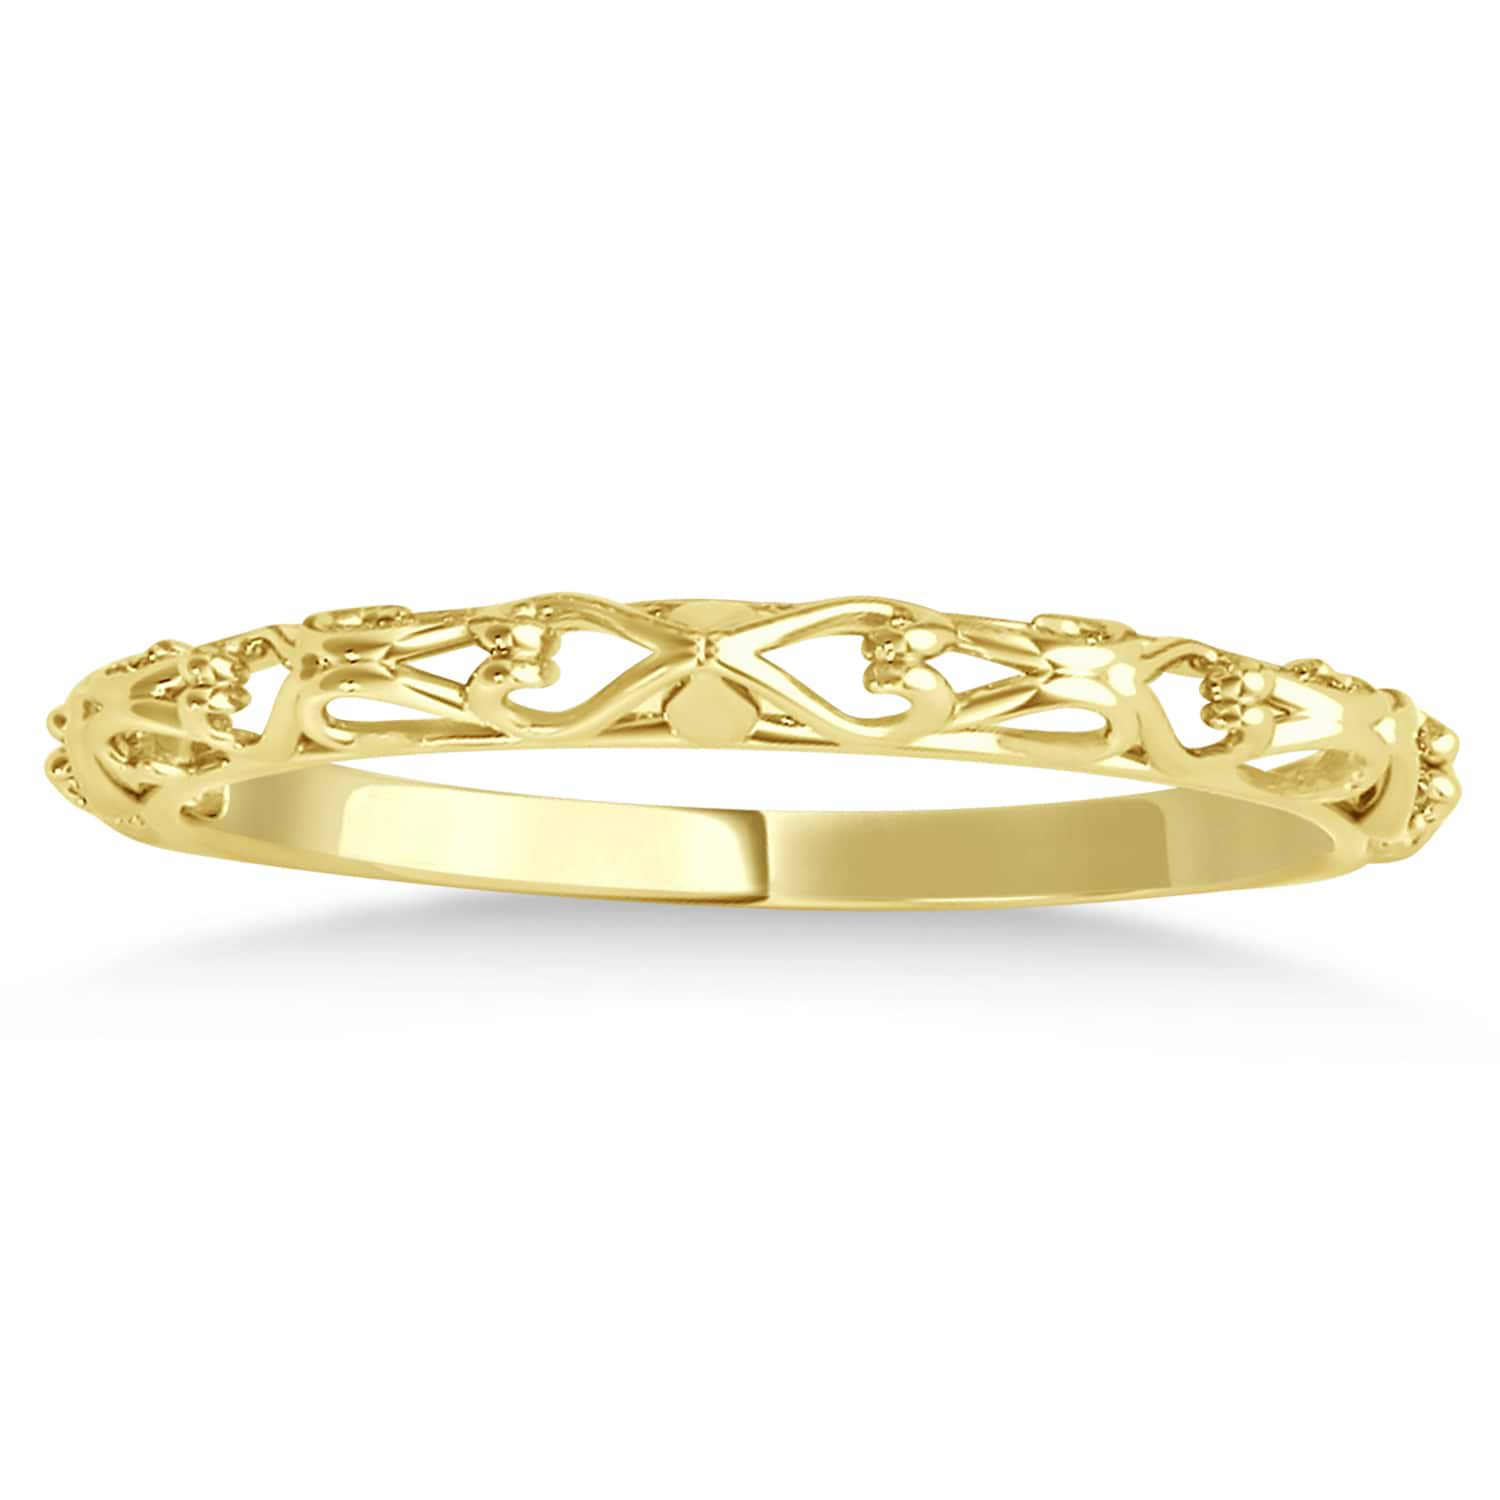 Antique Style Open Scrollwork Wedding Band 18k Yellow Gold